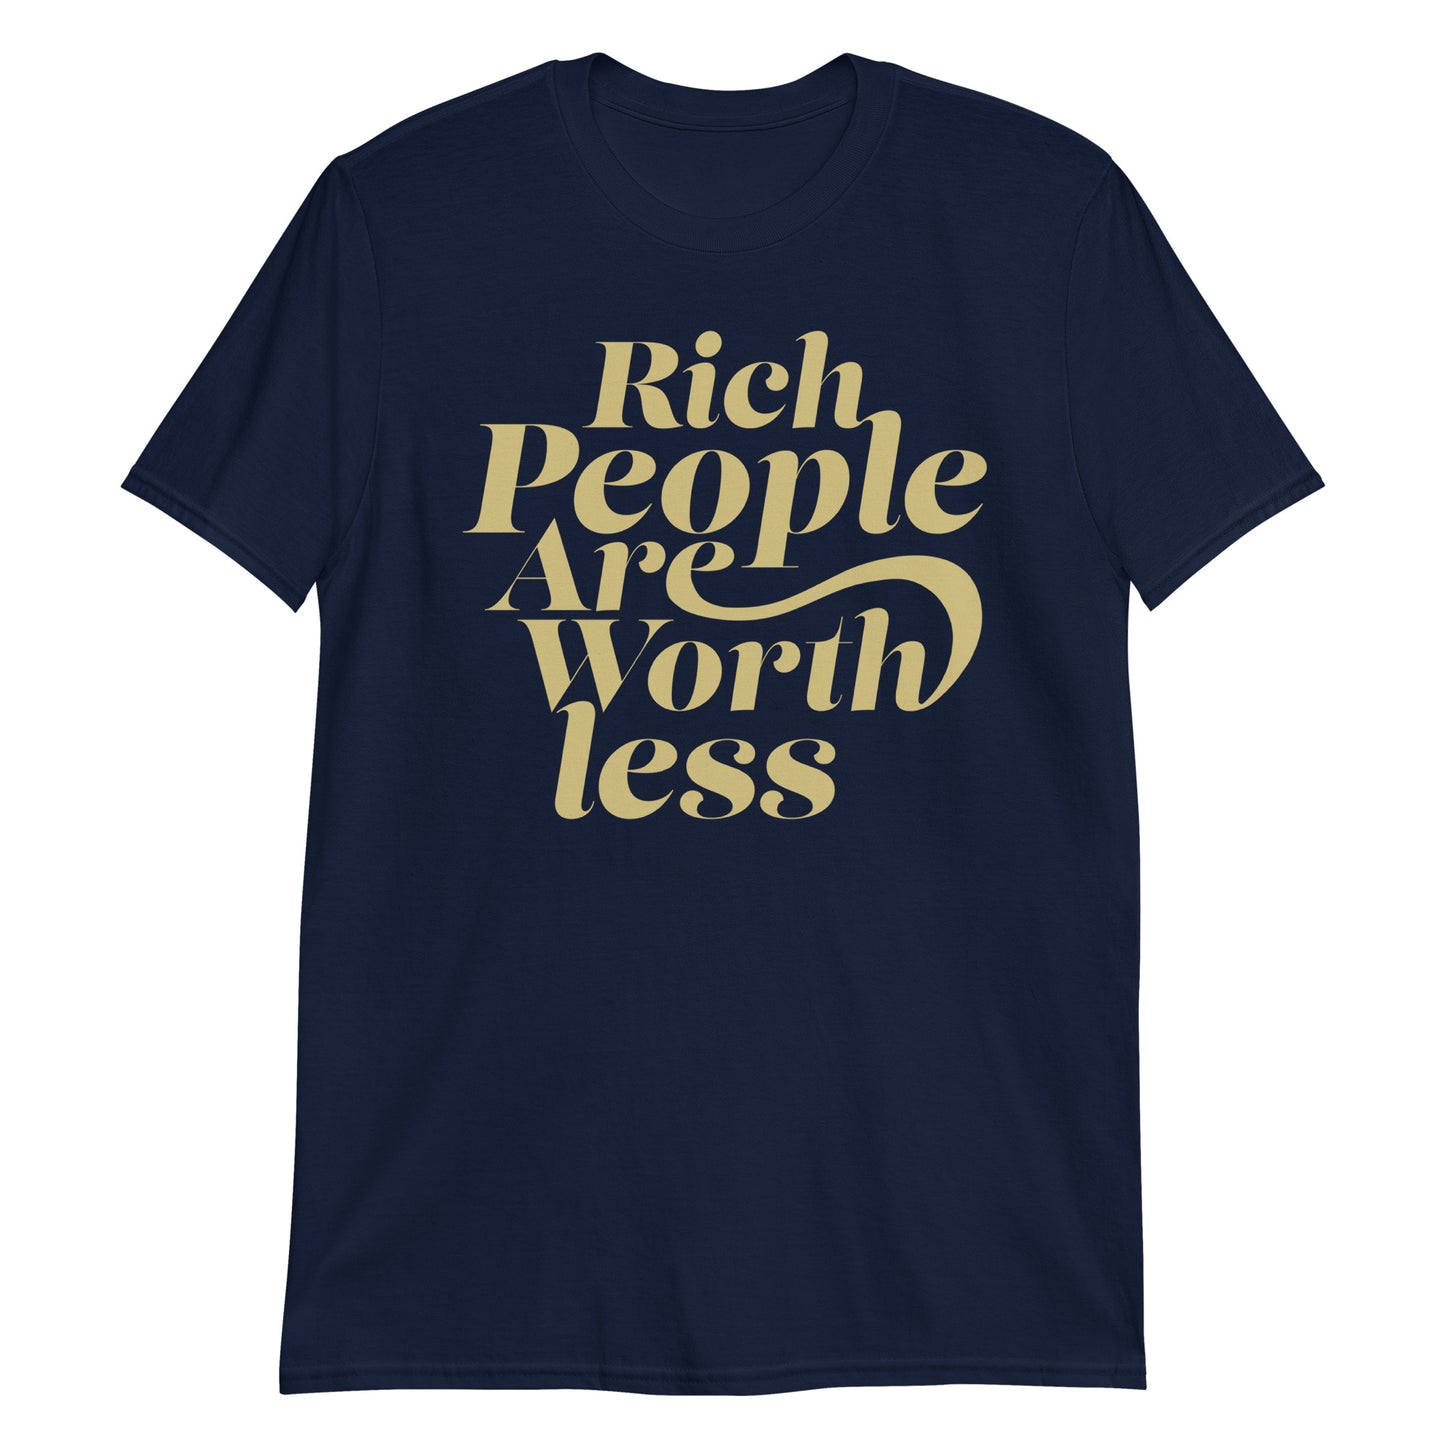 Rich People Are Worth less t-shirt